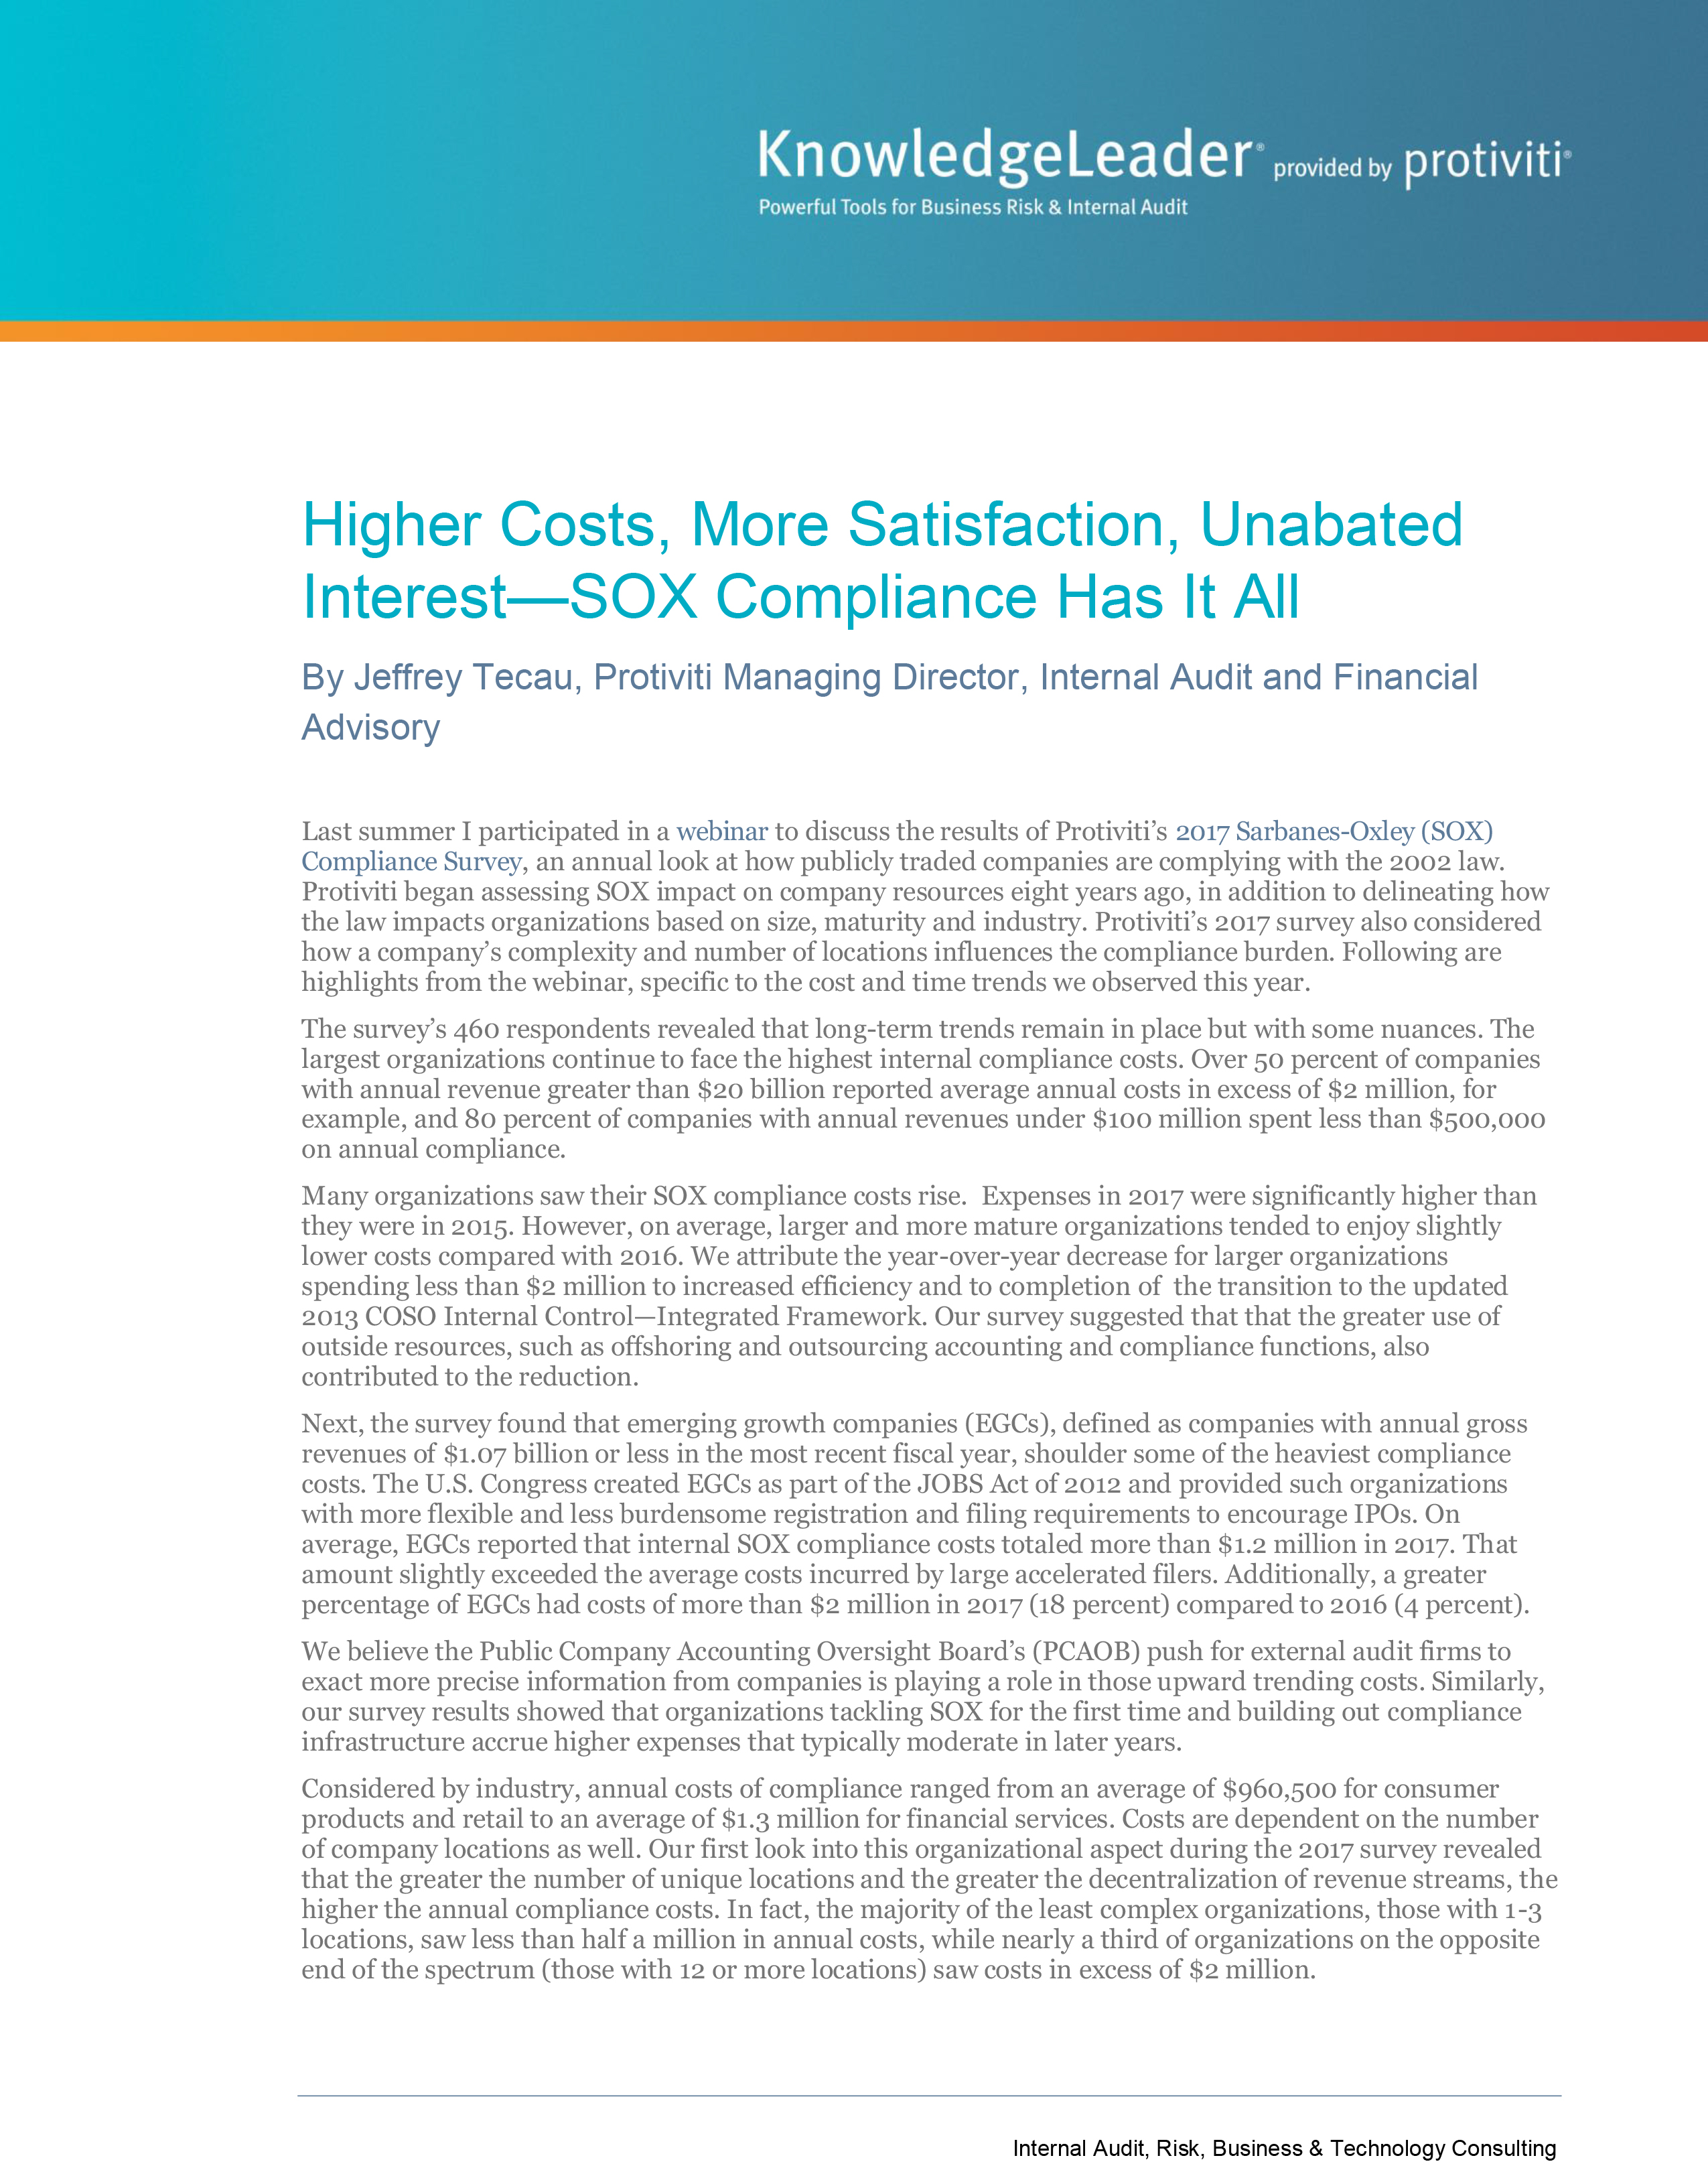 Screenshot of the first page of Higher Costs, More Satisfaction, Unabated Interest – SOX Compliance Has It All